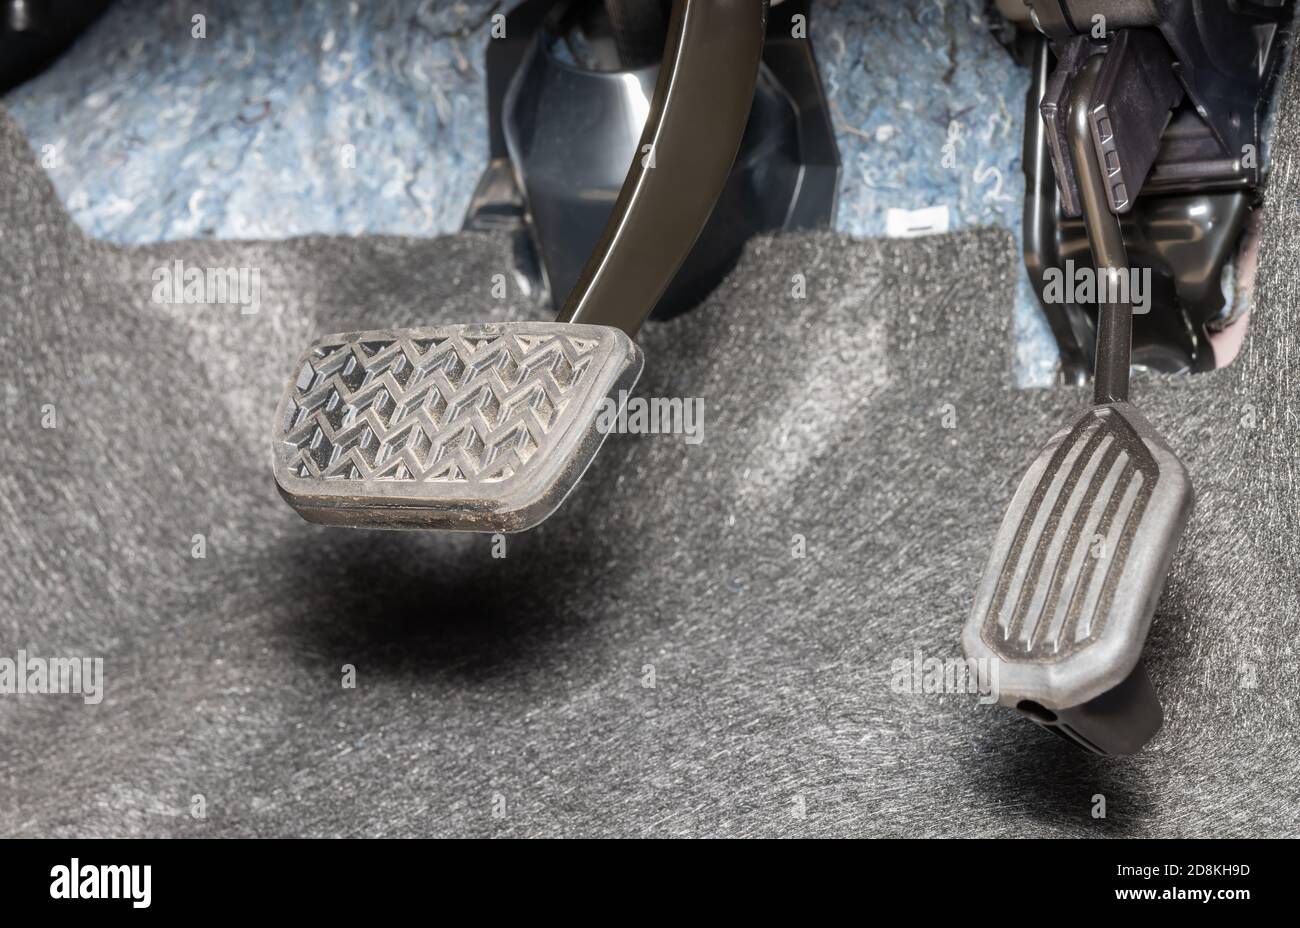 https://c8.alamy.com/comp/2D8KH9D/brake-pedal-and-accelerator-pedal-of-car-in-zoom-view-2D8KH9D.jpg